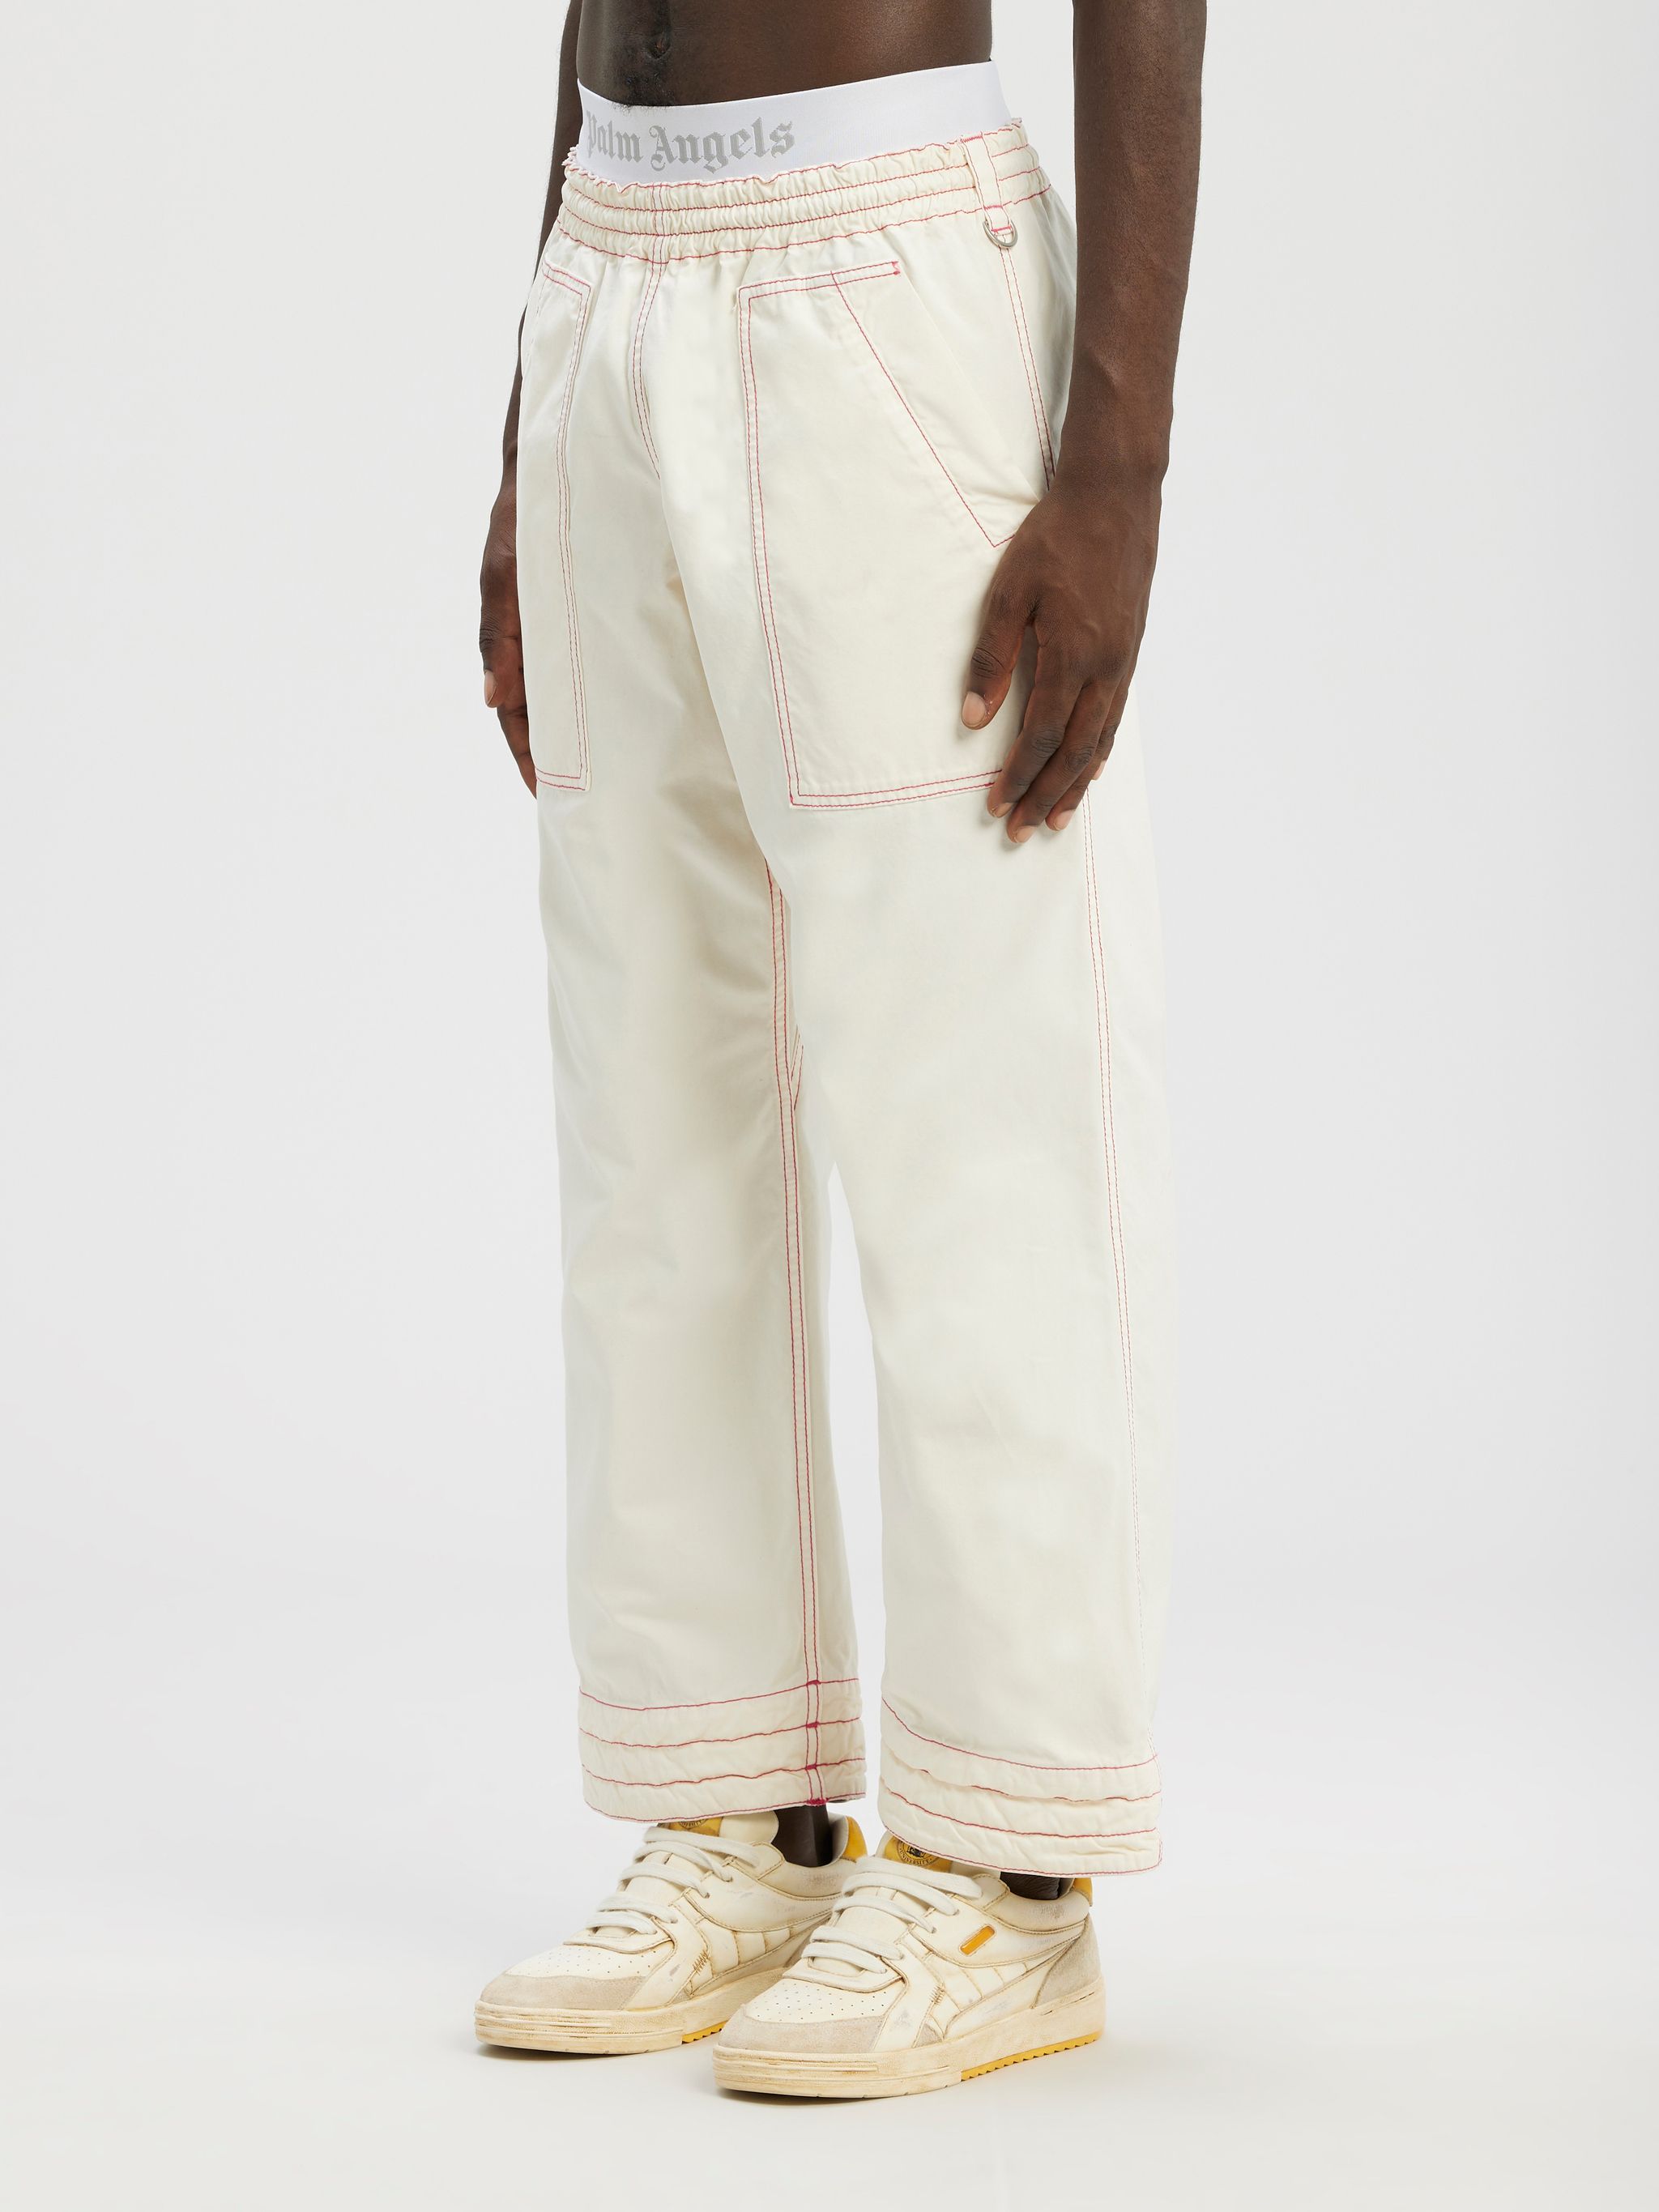 Judo Pants in white - Palm Angels® Official